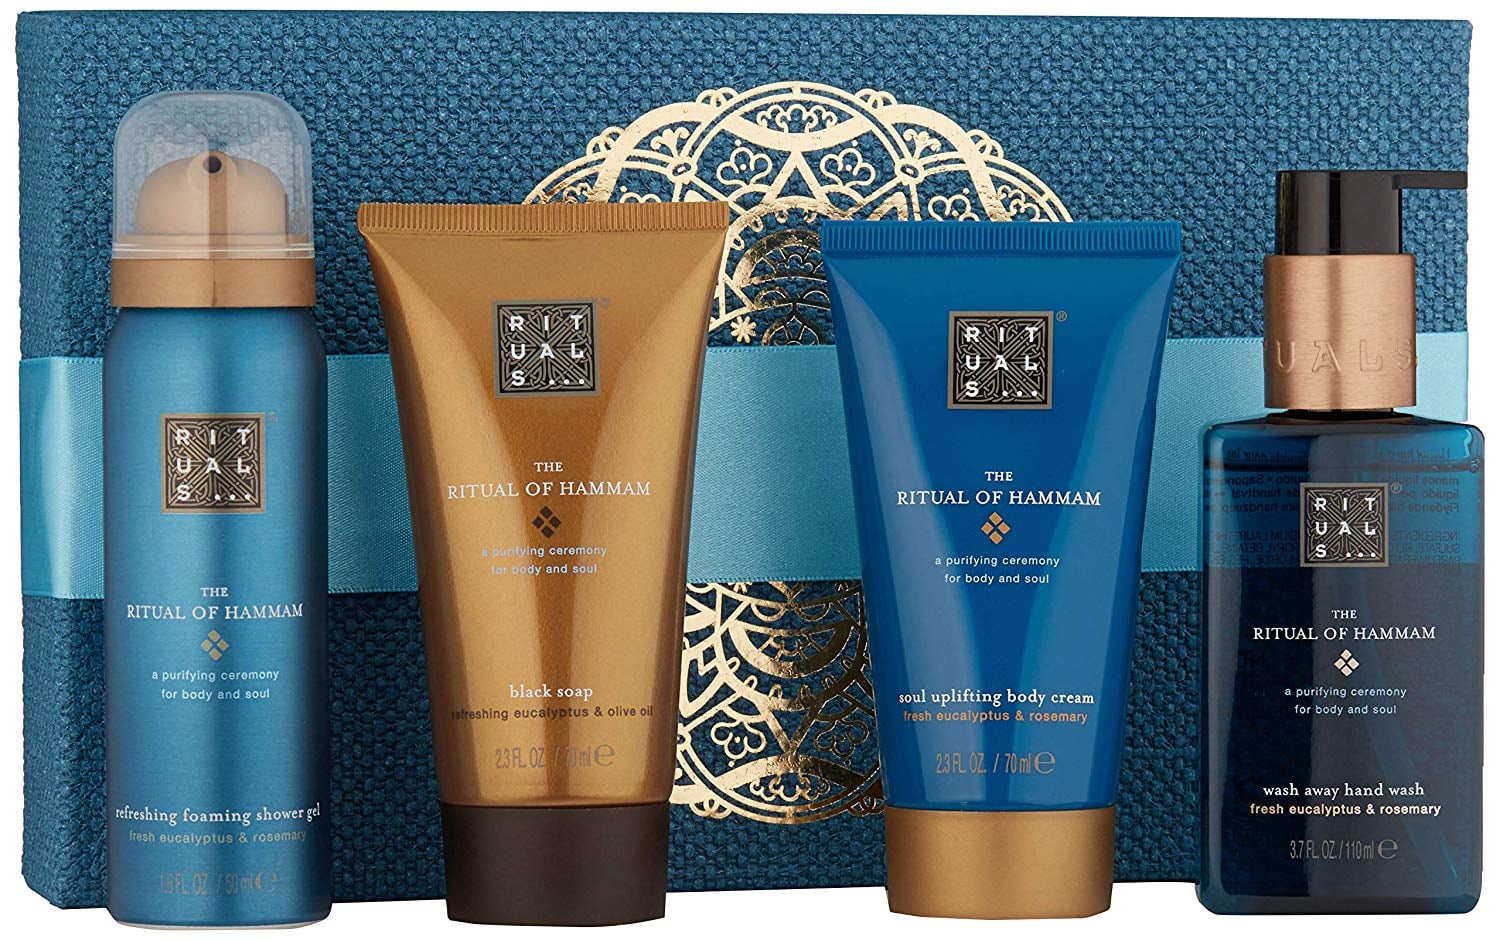 Inspiratie juni Rimpels Rituals The Ritual of Hammam Gift Set | We Forgot Christmas Is Next Week,  Too, but Amazon Has Great Last-Minute Beauty Gifts | POPSUGAR Beauty Photo 7